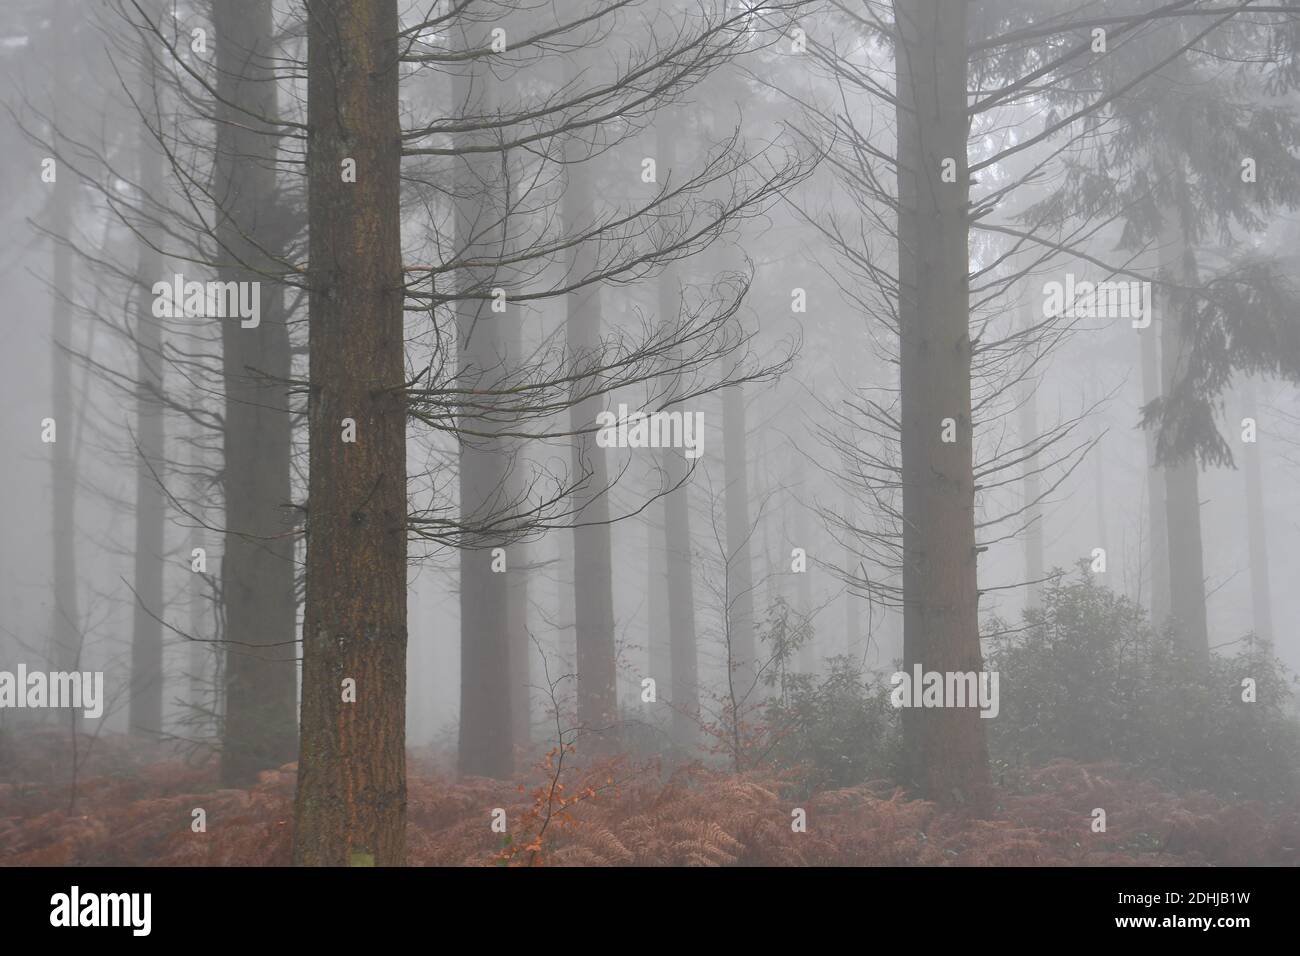 Stock images of fog in woodland - North Downs near West Horsley, Surrey.- Dick Focks Common - Forestry Commission.     Picture shows fog, trees, mist across this picturesque area of Surrey.  Picture taken 7th December 2020 Stock Photo